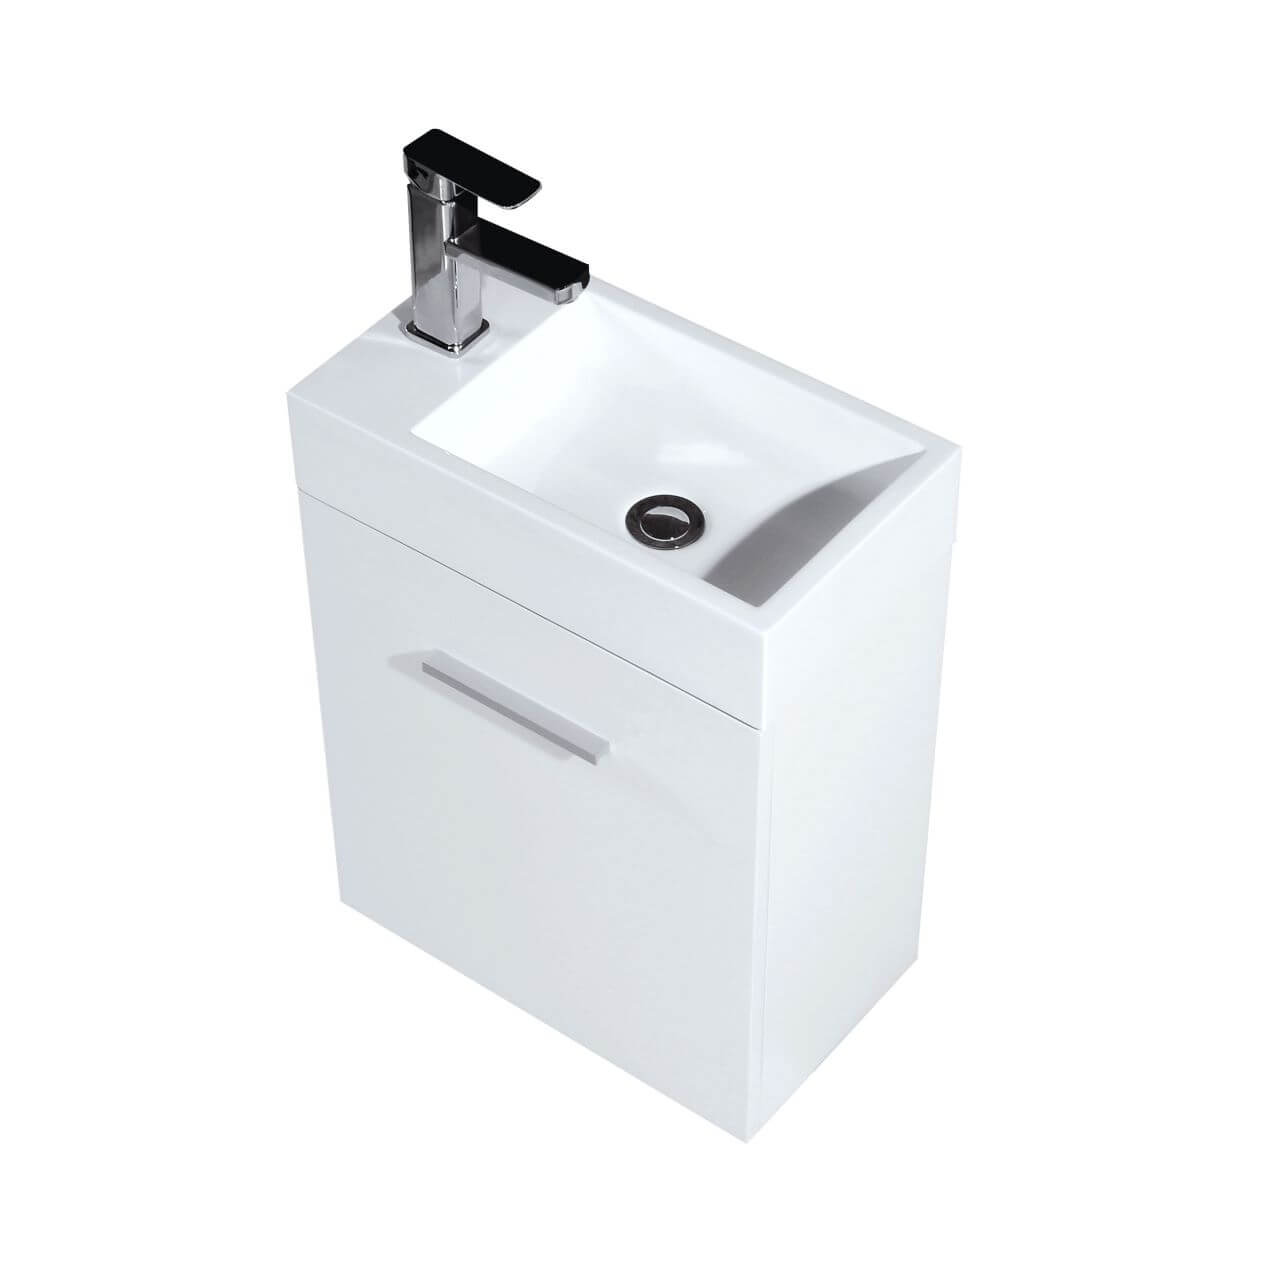 KUBEBATH Bliss BSL18-GW 18" Single Wall Mount Bathroom Vanity in High Gloss White with White Acrylic Composite, Integrated Sink, Angled View